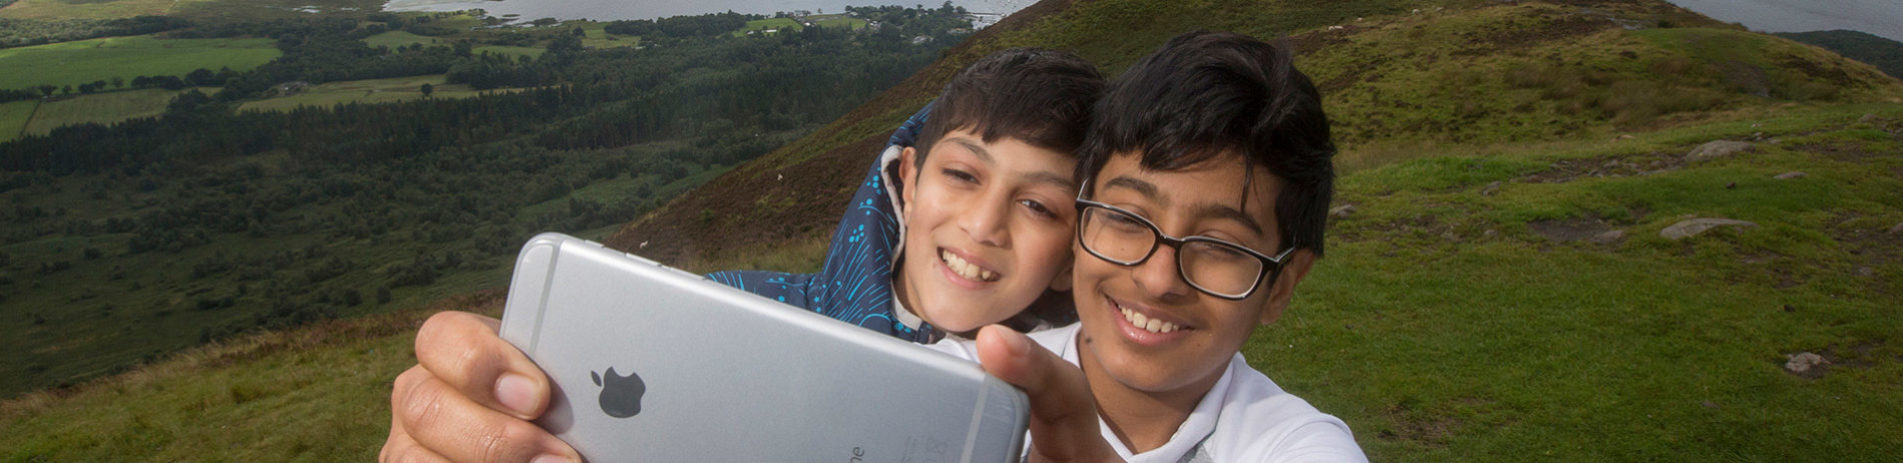 two-young-boys-smiling-and-taking-a-selfie-on-conic-hill-with-loch-lomond-behind